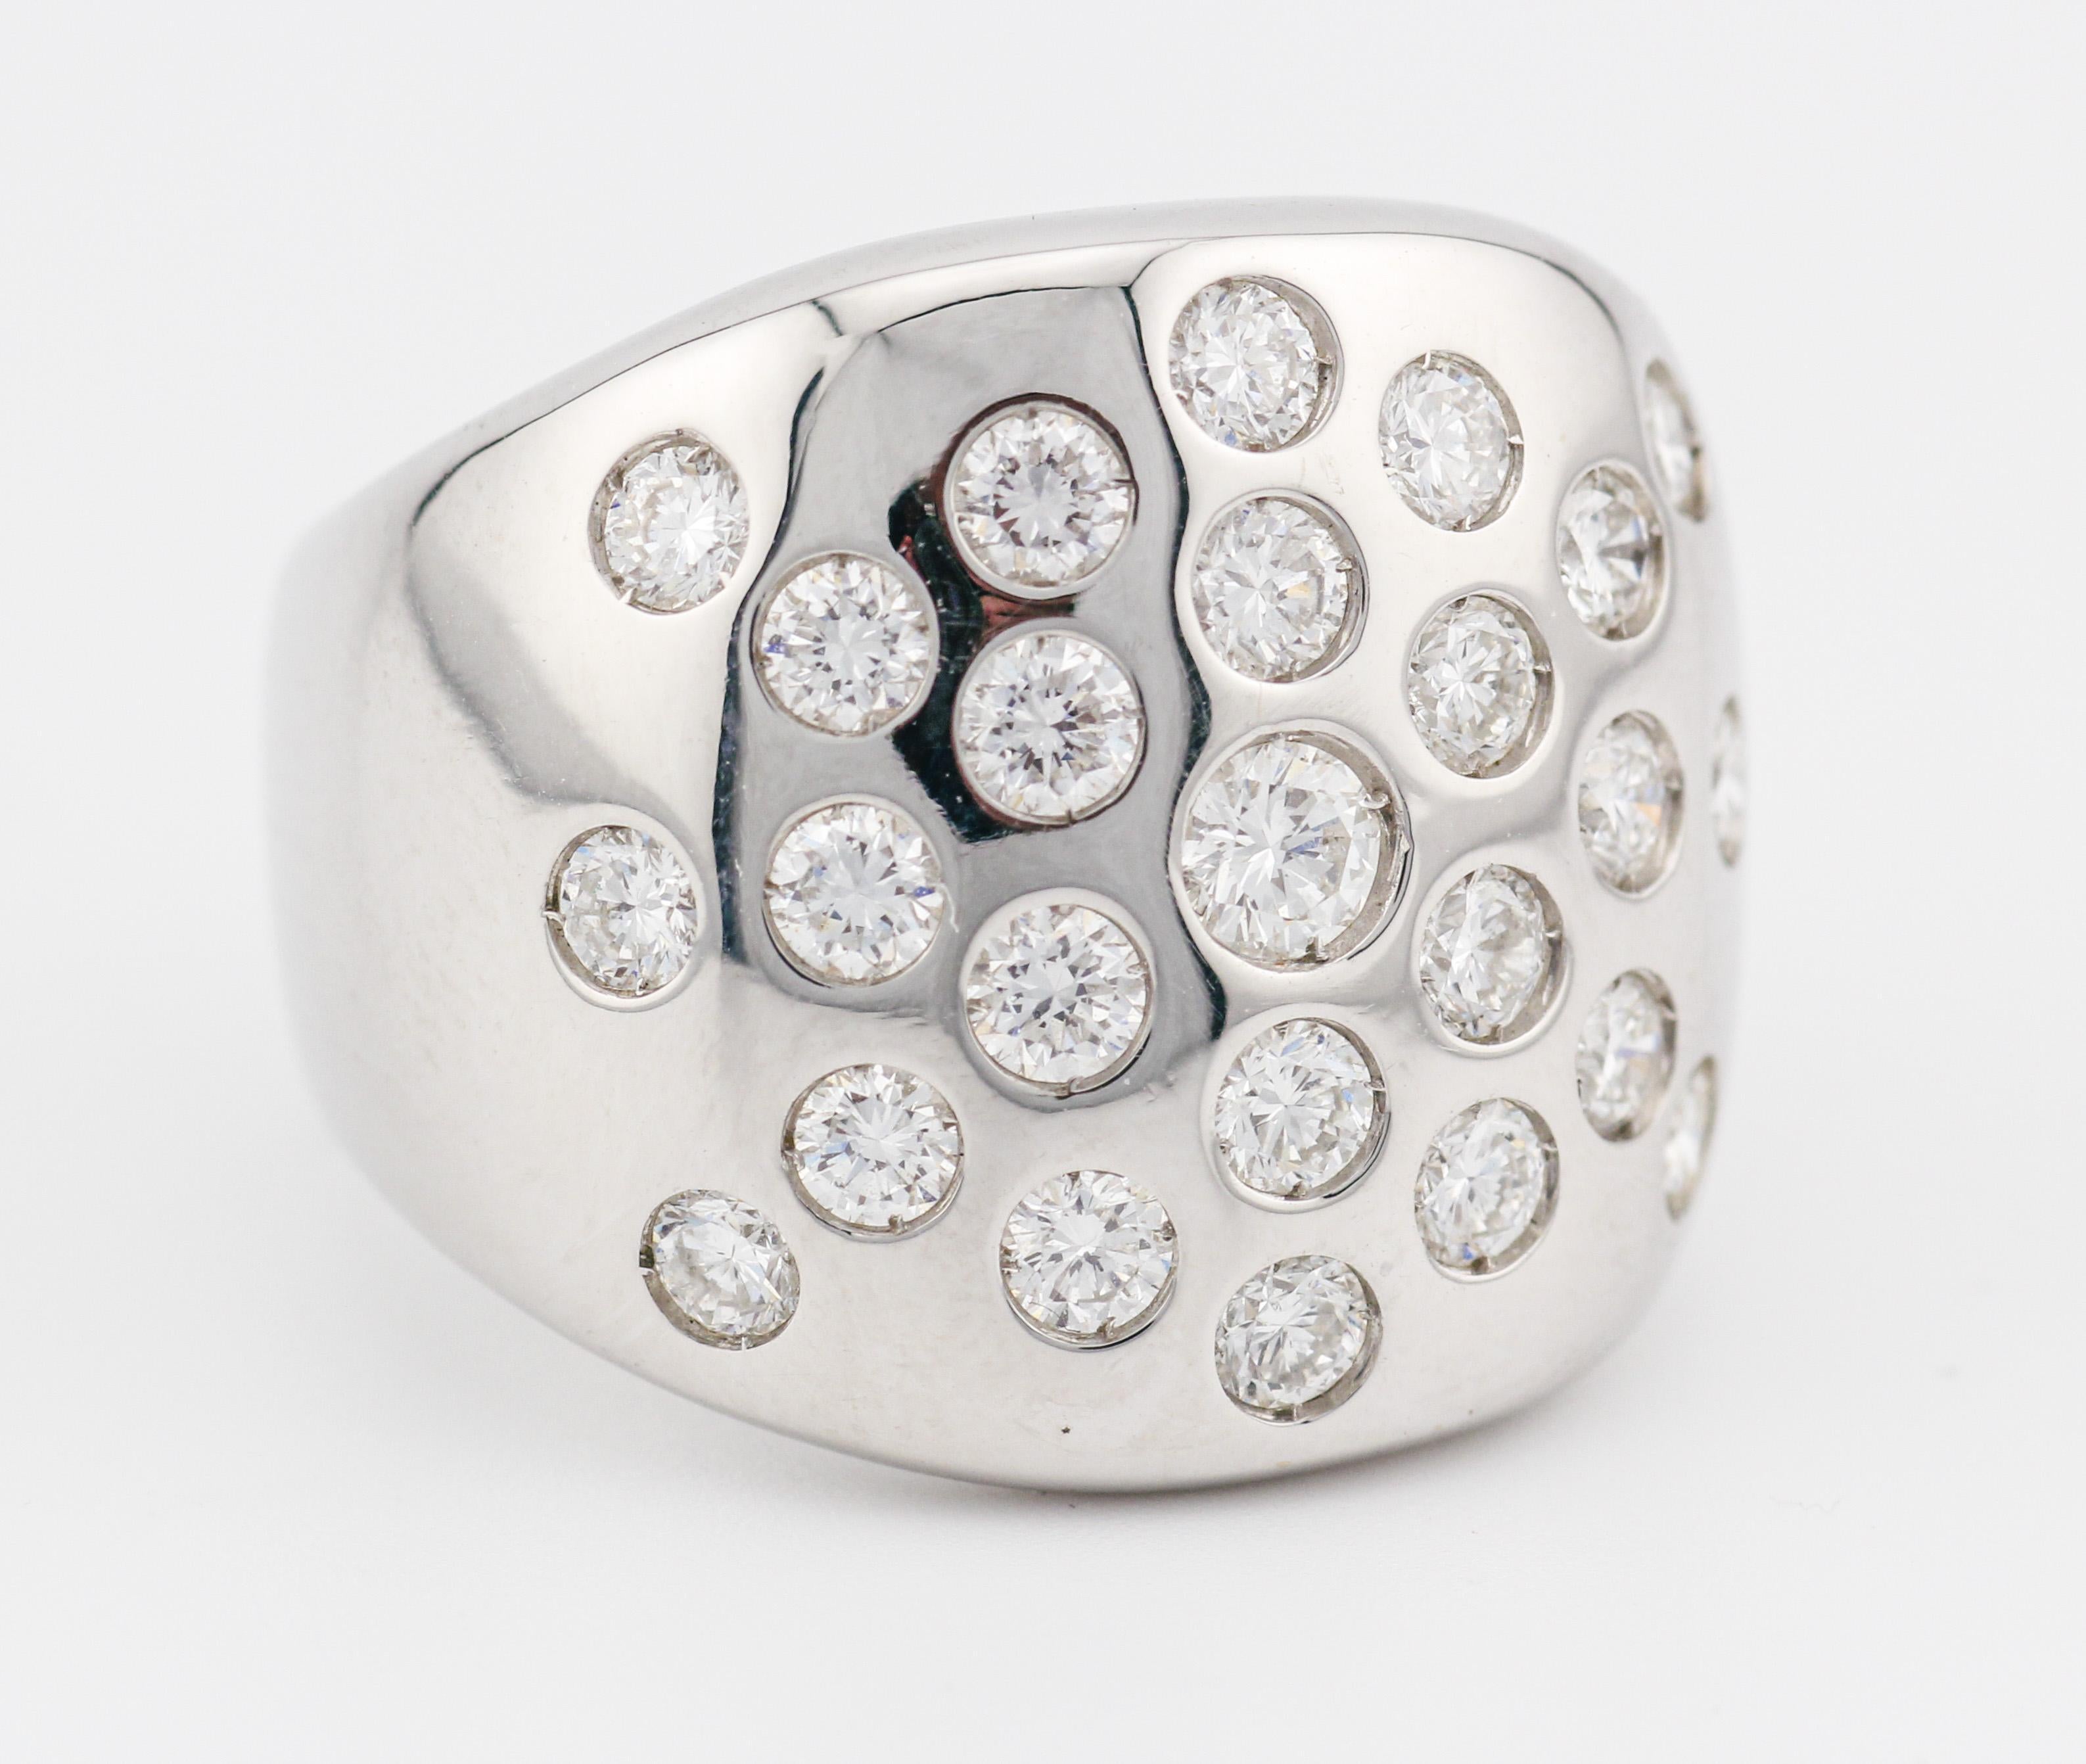 Hermes 1.45 Carat Diamond 18K White Gold Dome Ring Size 6 For Sale 4